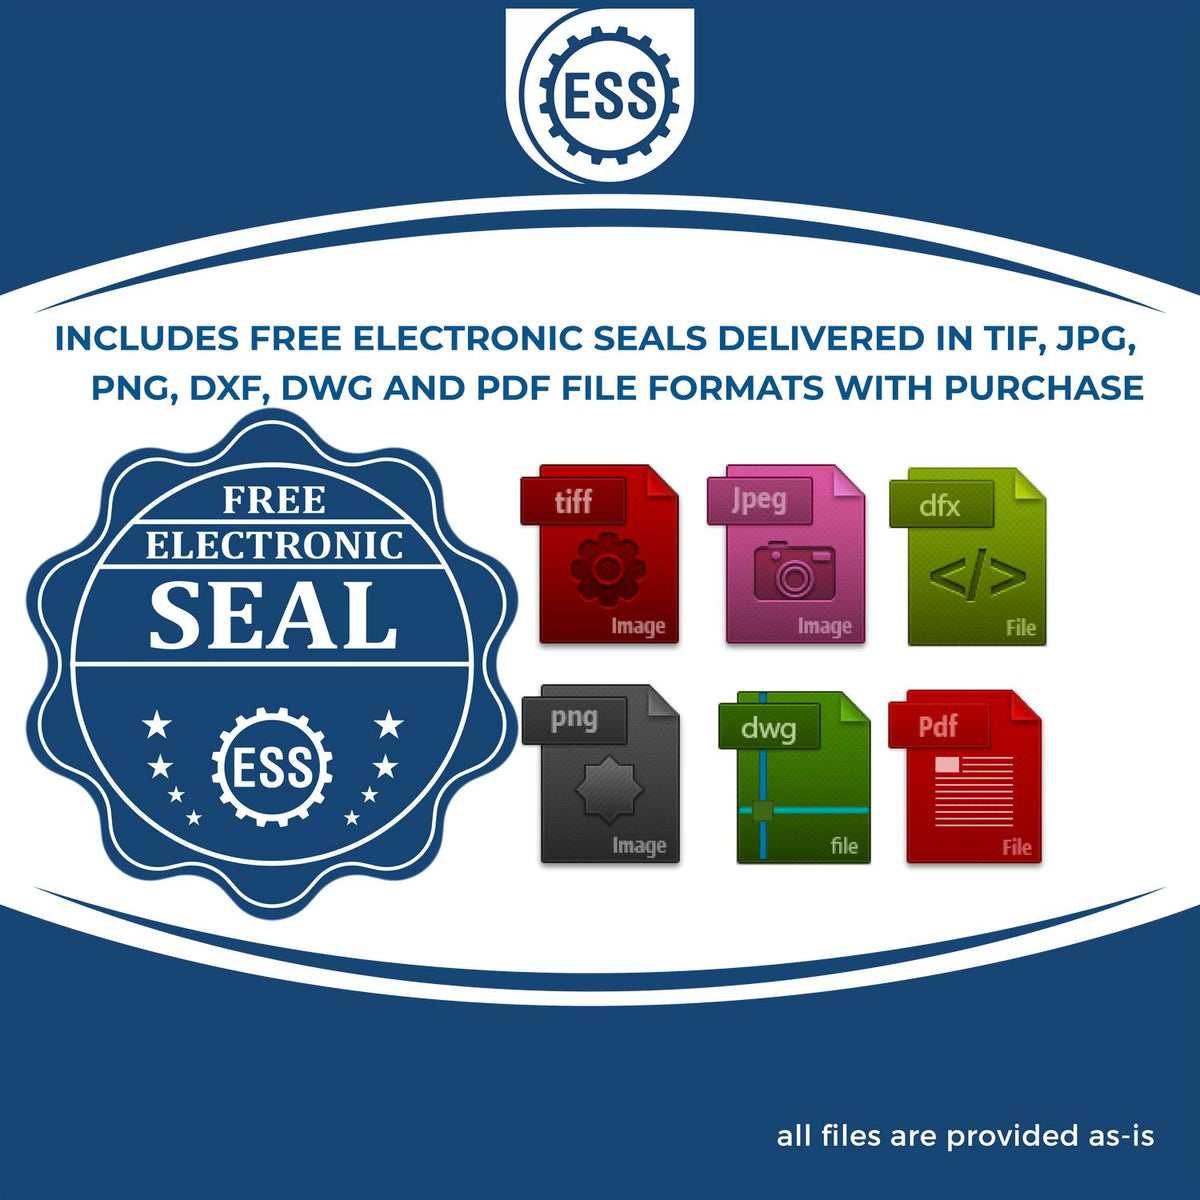 An infographic for the free electronic seal for the Heavy Duty Cast Iron South Carolina Geologist Seal Embosser illustrating the different file type icons such as DXF, DWG, TIF, JPG and PNG.